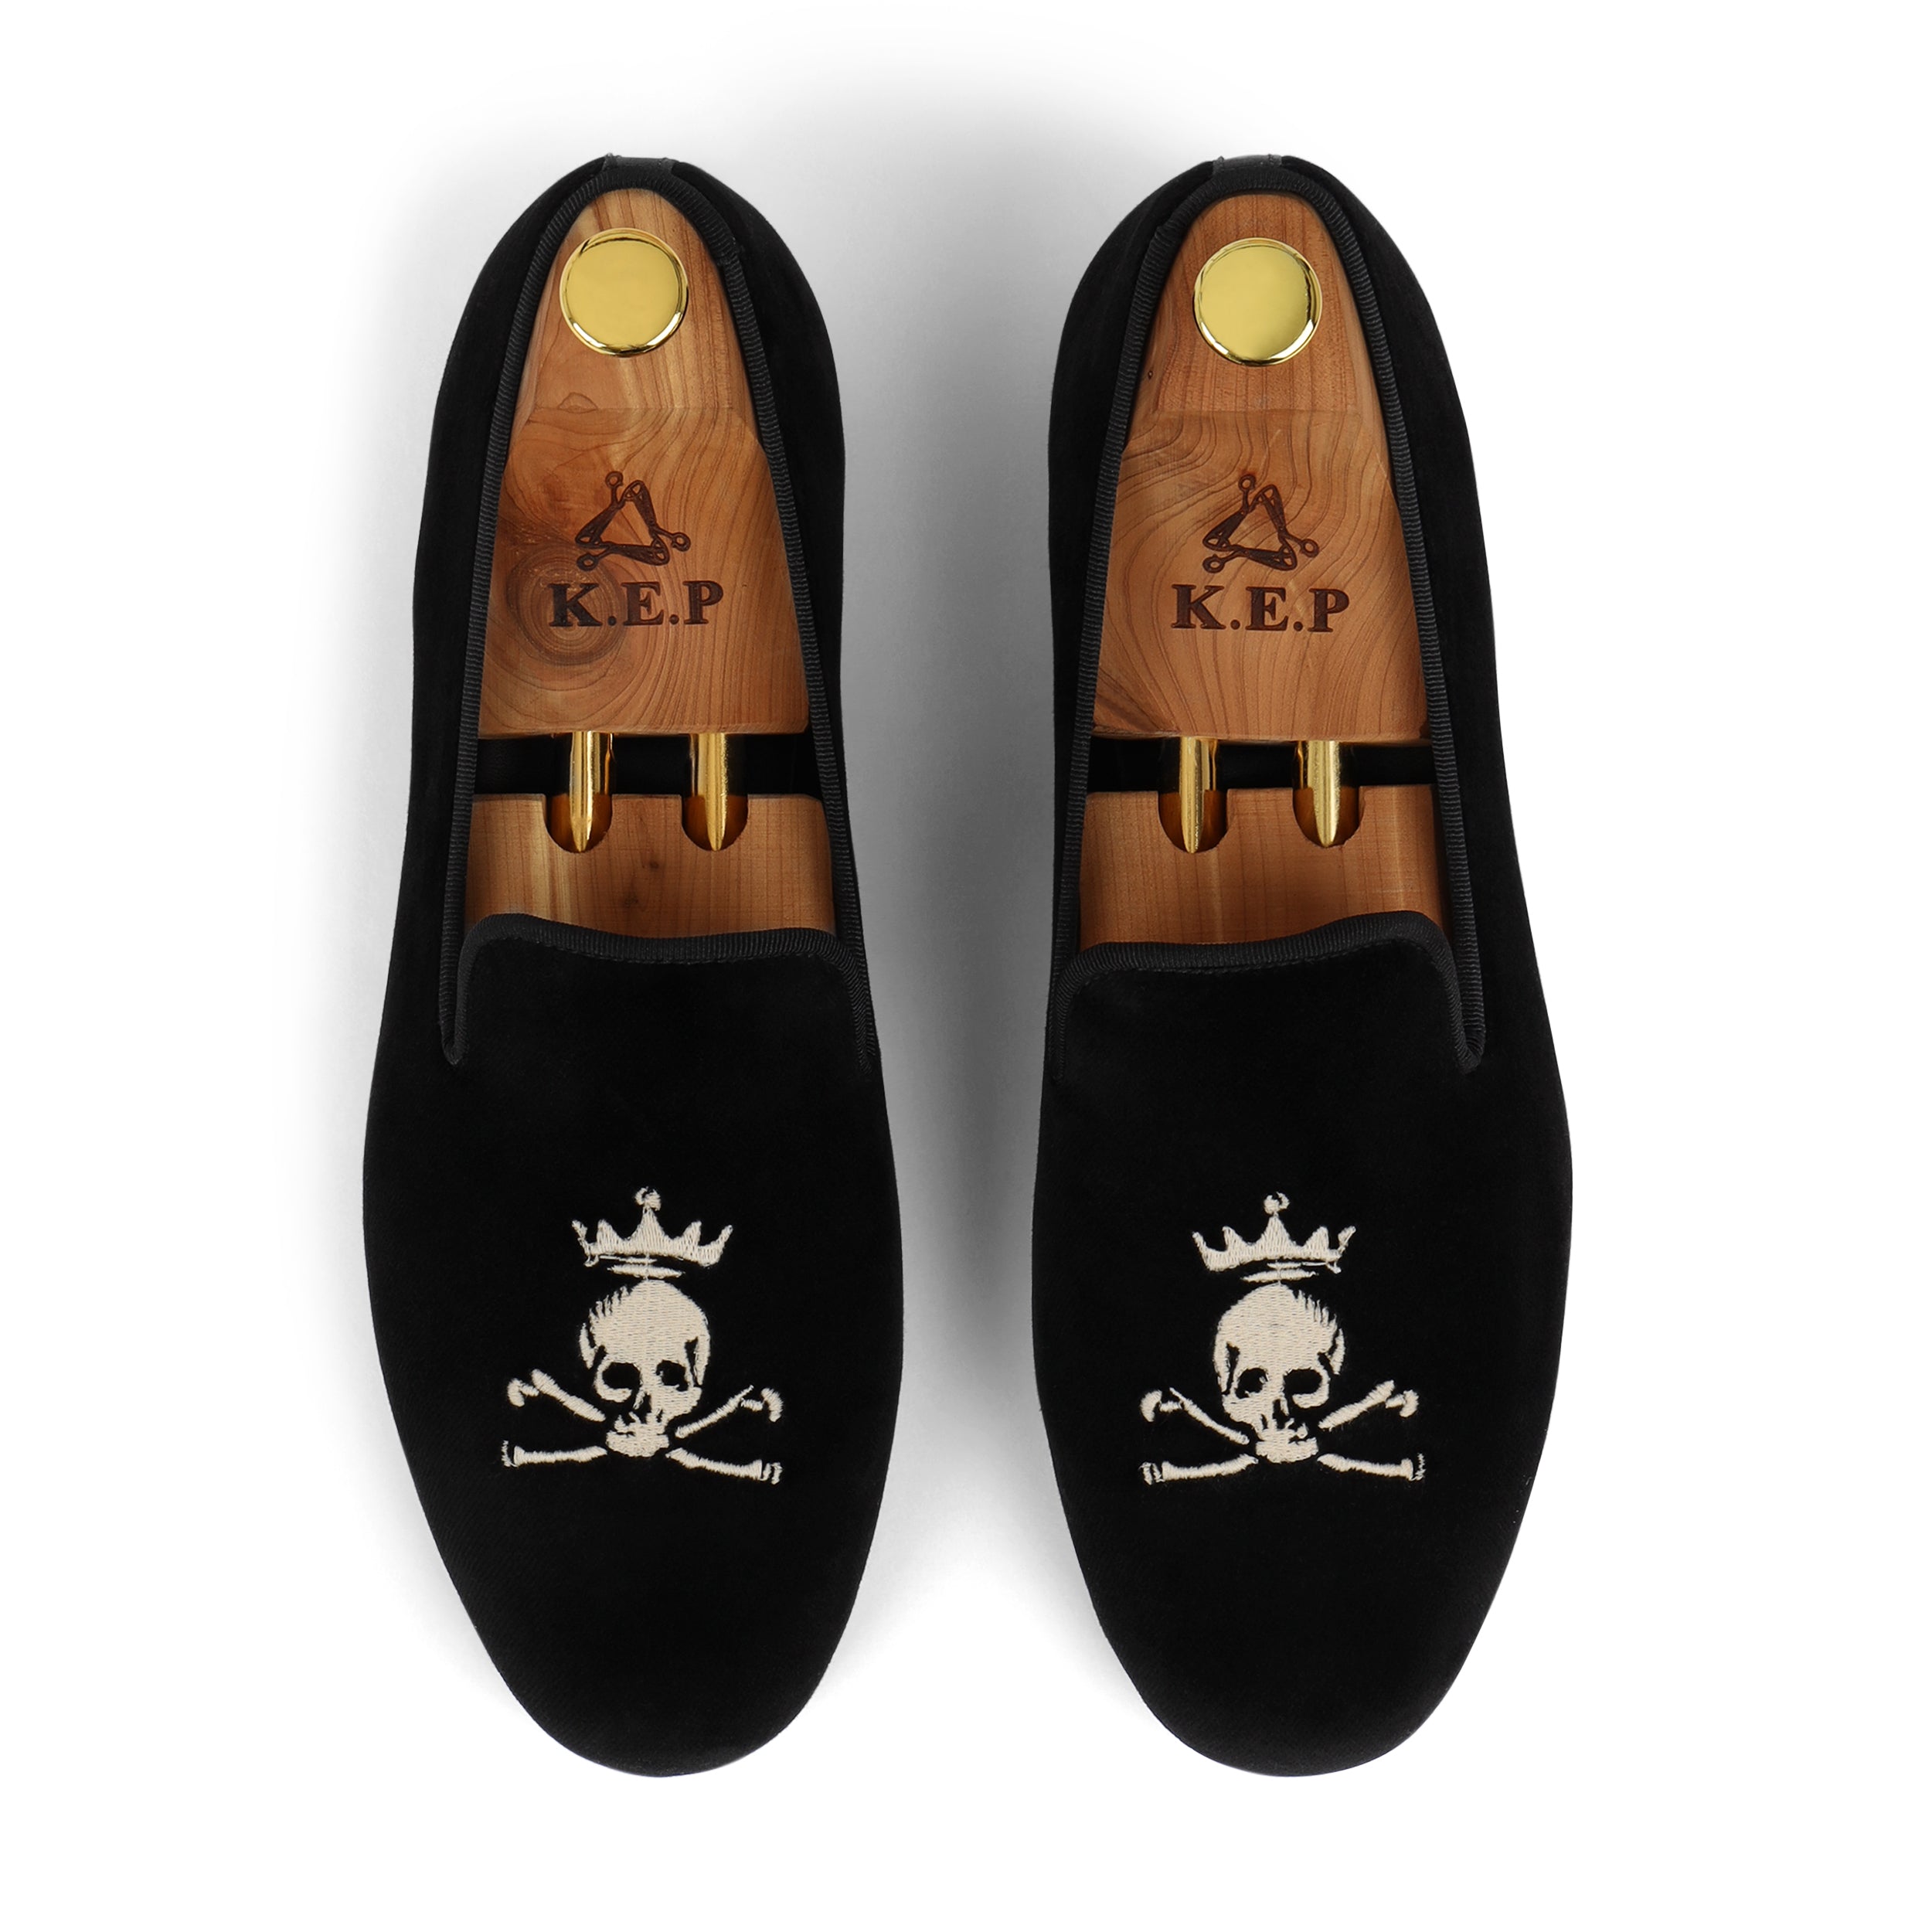 The King Loafer